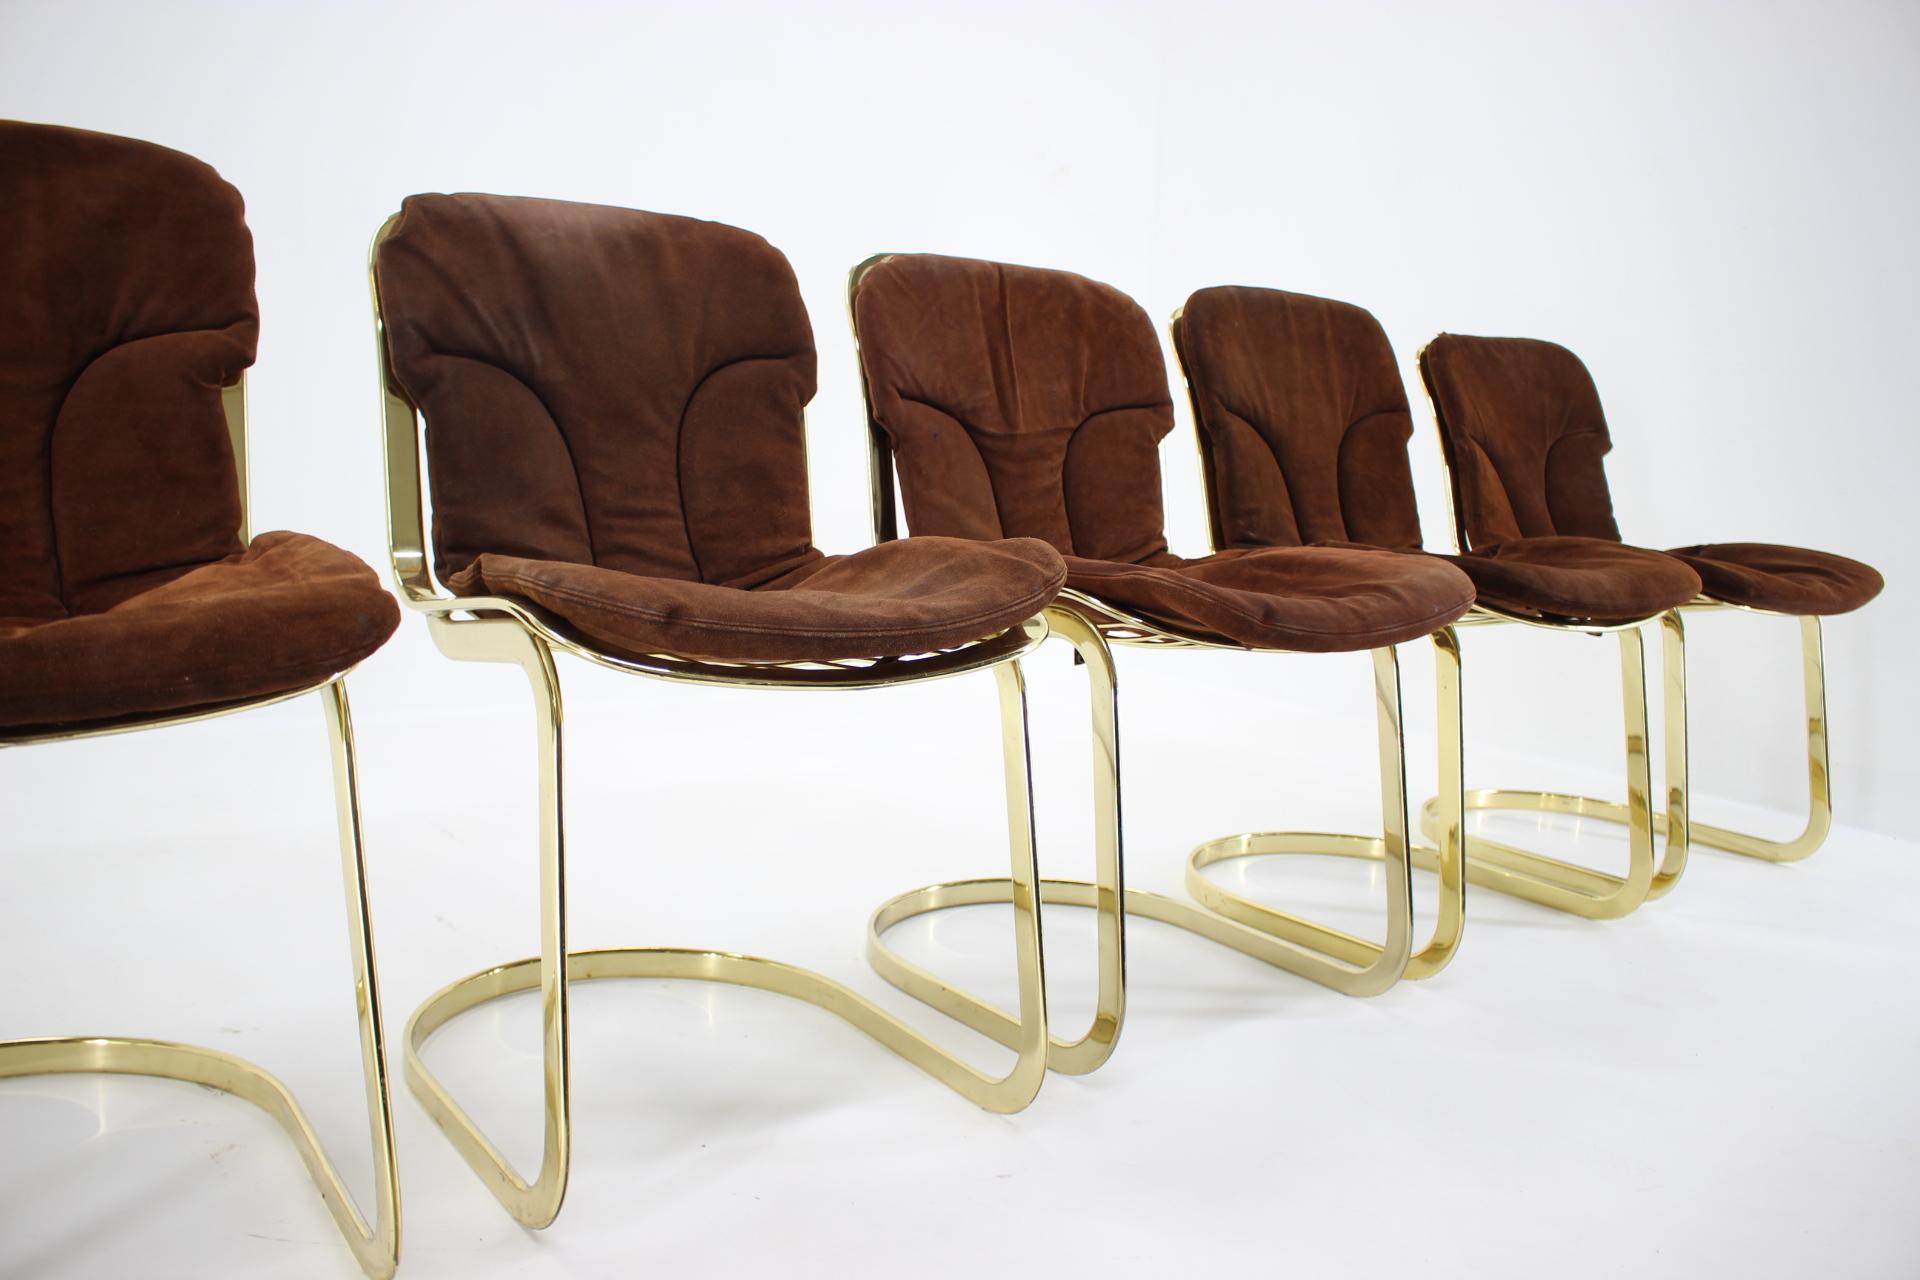 Late 20th Century Set of Six Leather Italian Dining Chairs by Willy Rizzo for Cidue, 1970s